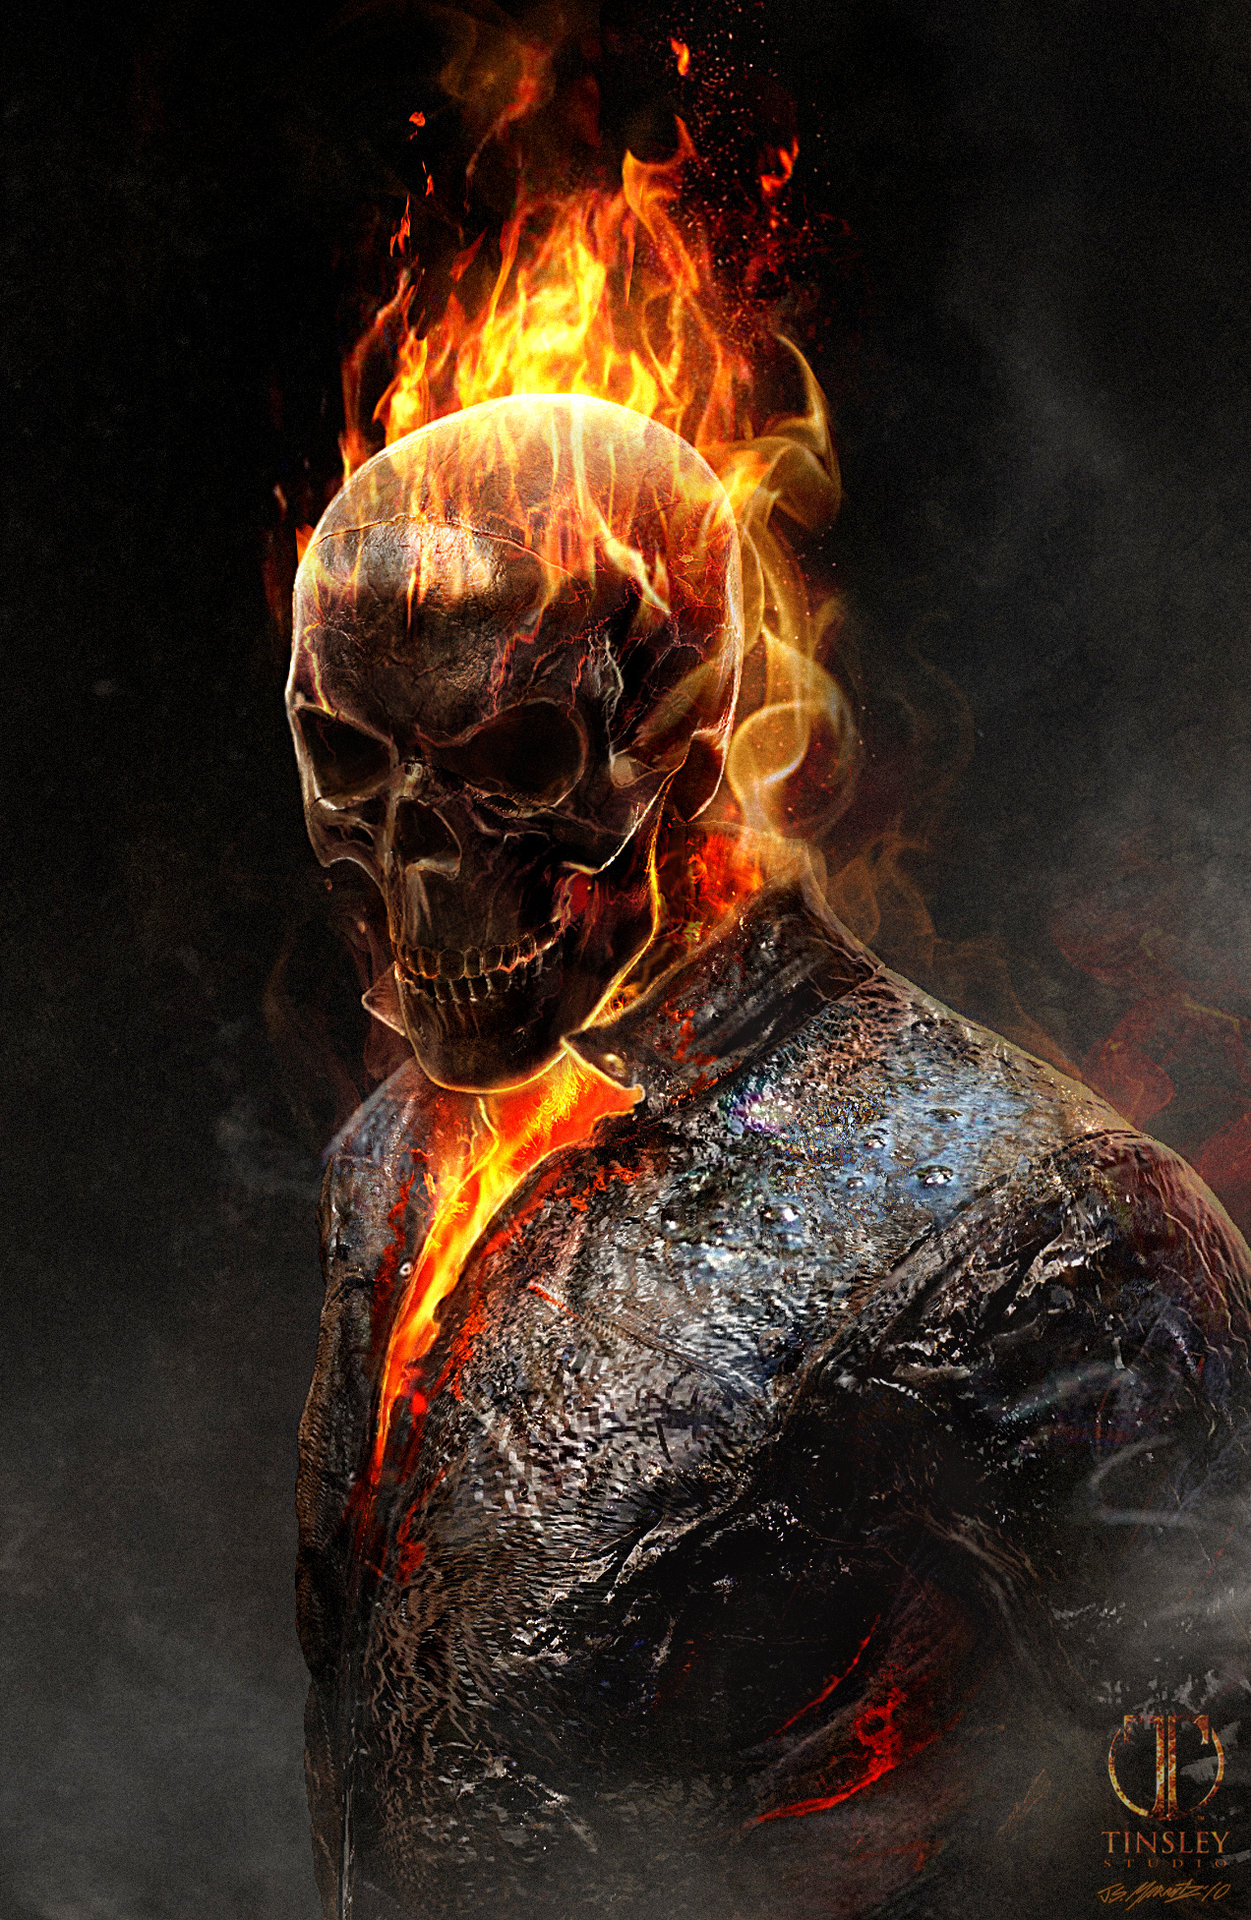 Marvel Announces Ghost Rider Joining Agents Of S.H.I.E.L.D.